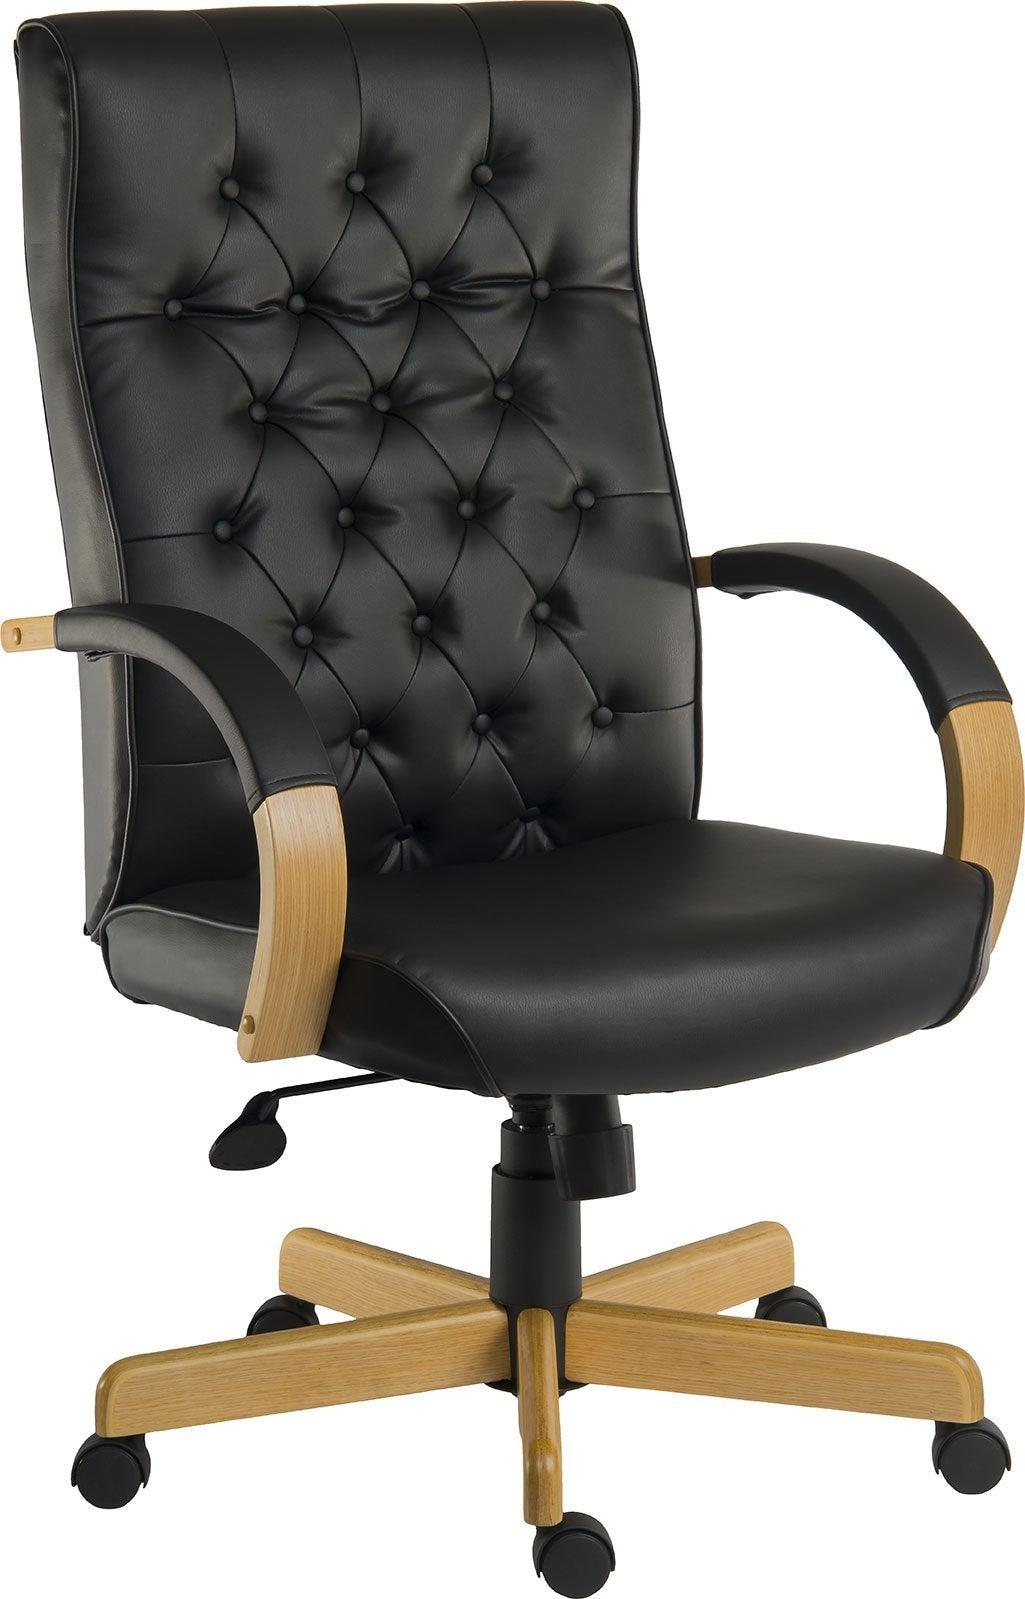 Warwick noir leather office chair - image 1